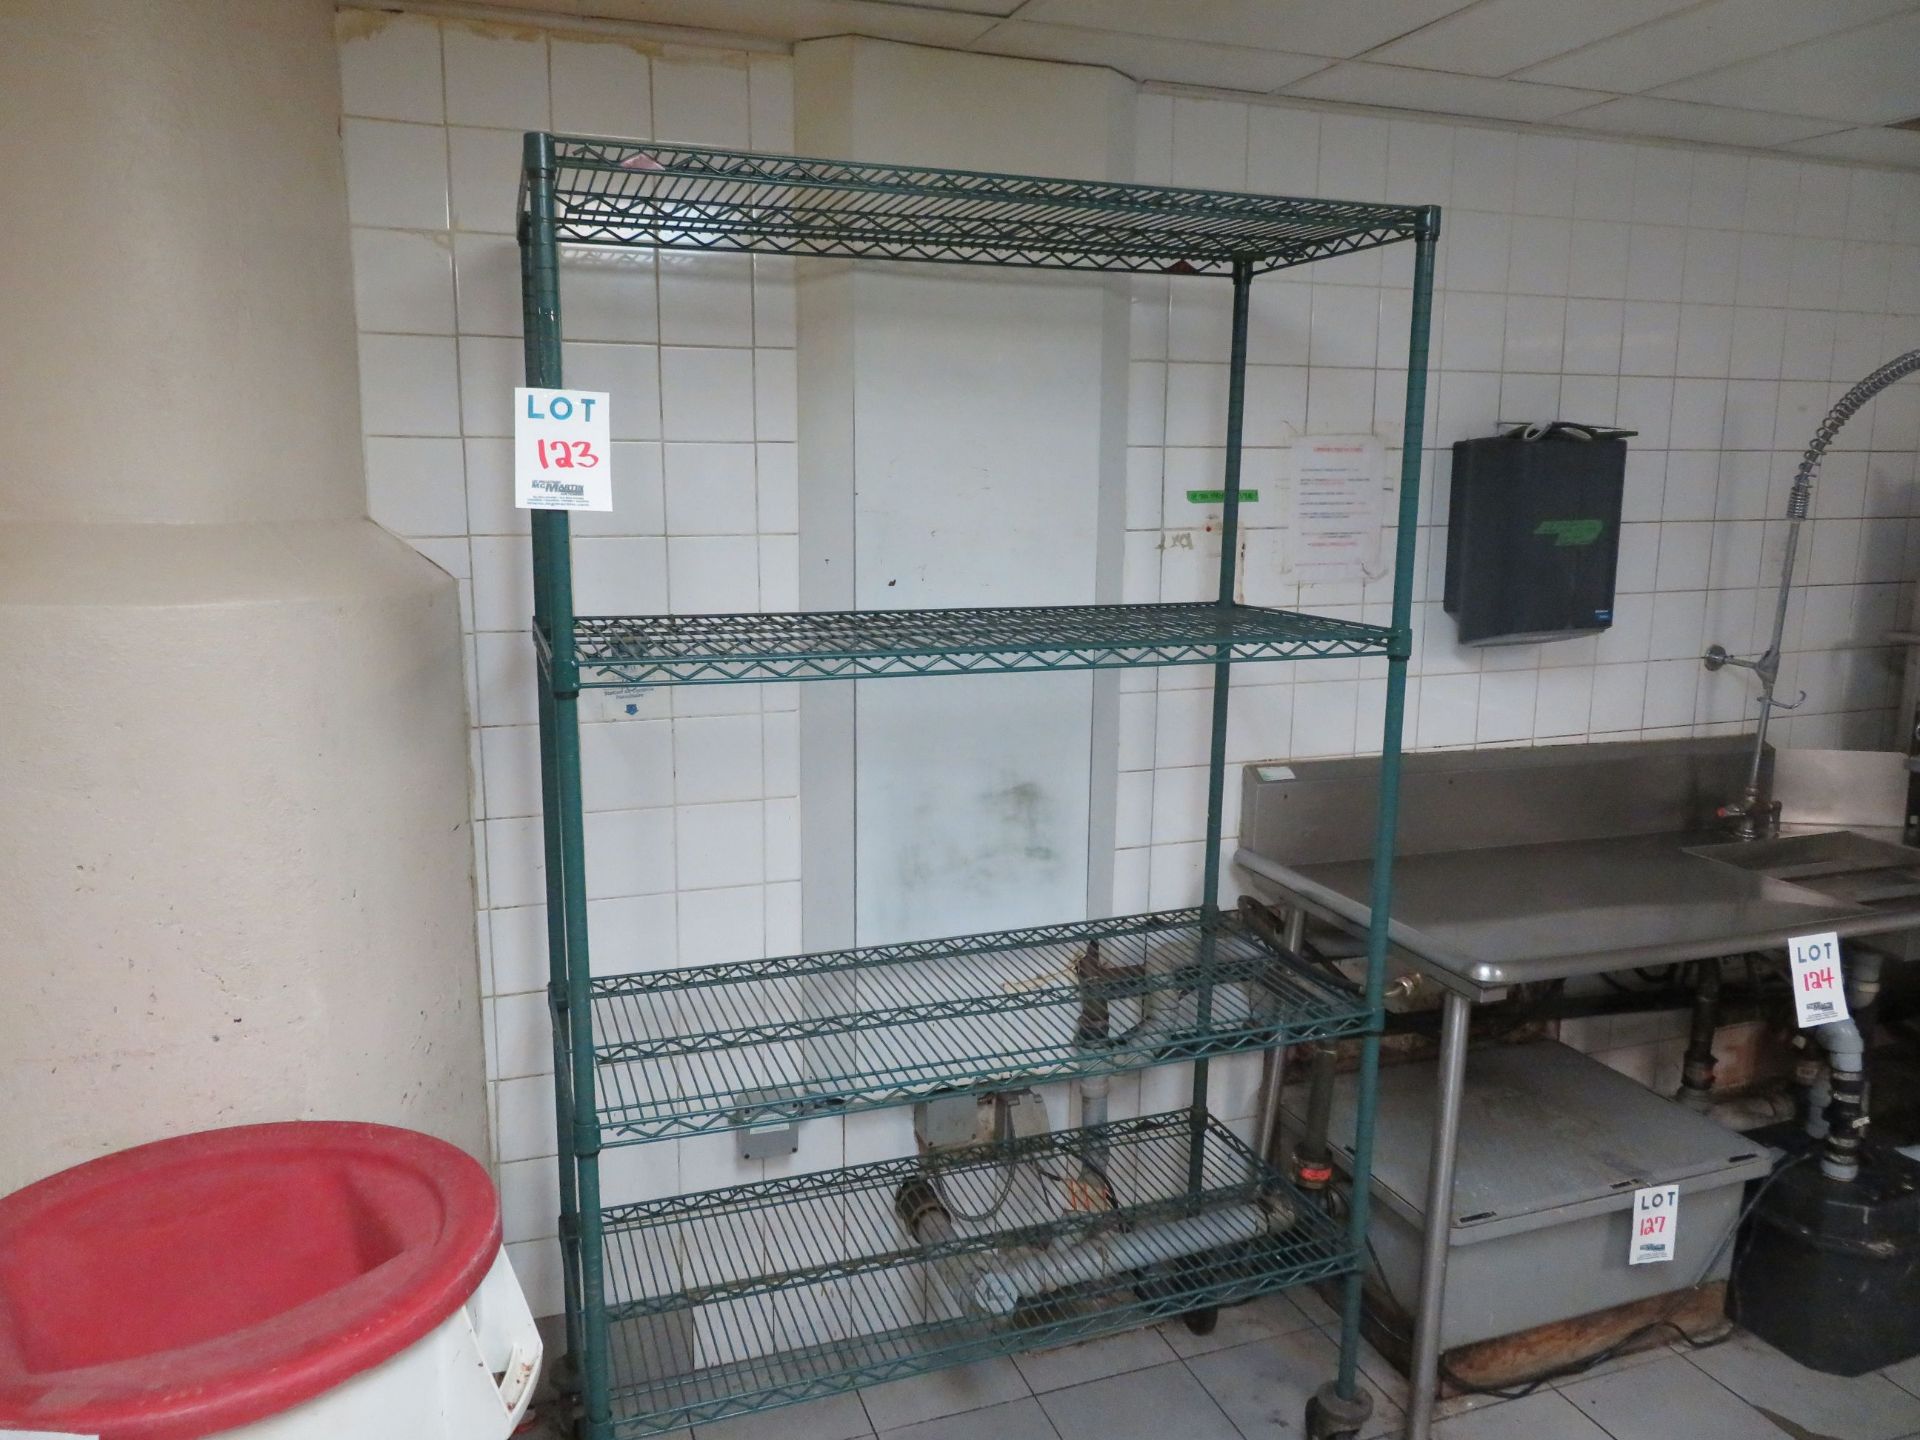 Stainless steel shelving on wheels approx. 48"w x 21"d x 80"h